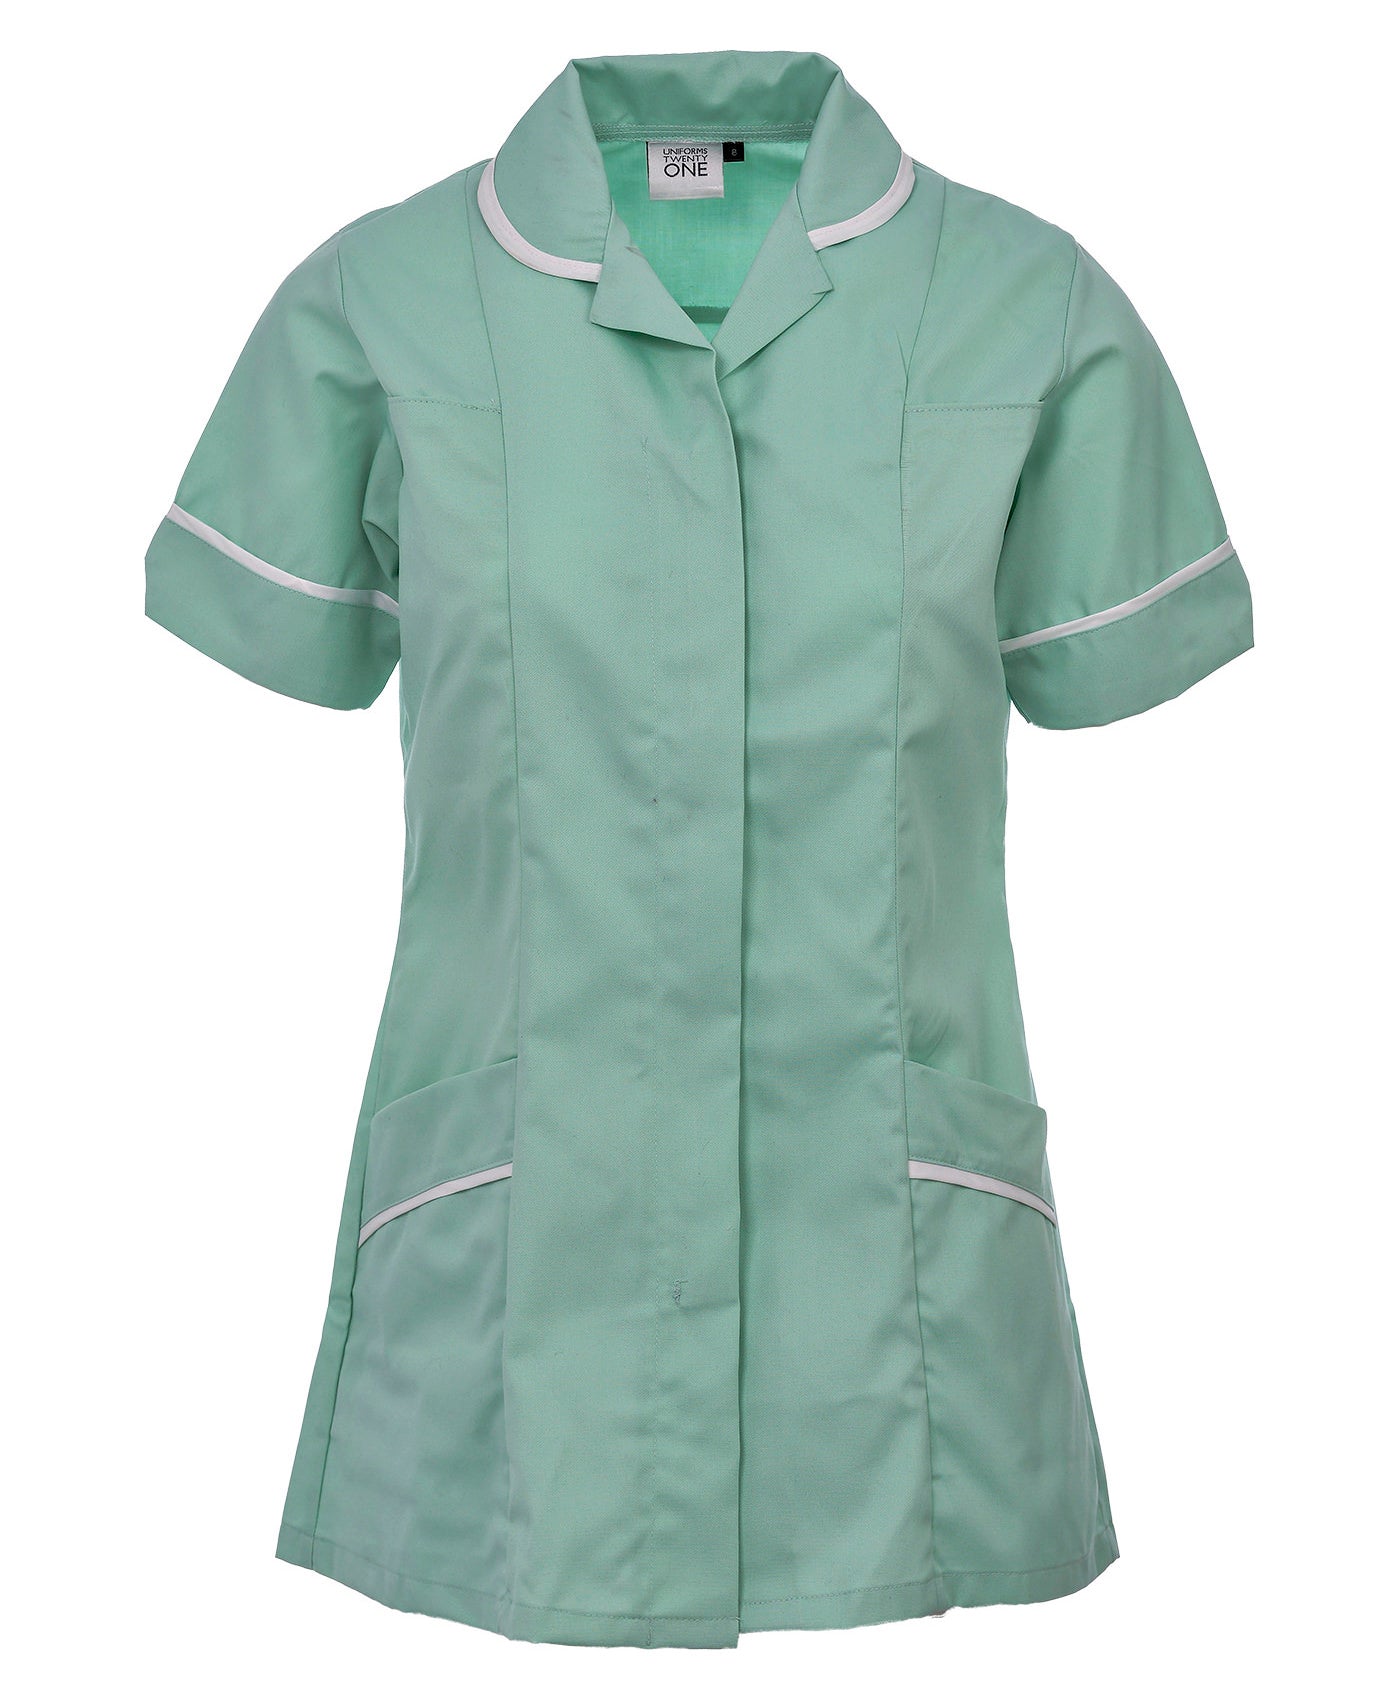 Women's Poly Cotton Tunic Ideal for Nurses and Care Homes | Size 8 to 26 | FNLT01 Mint Green